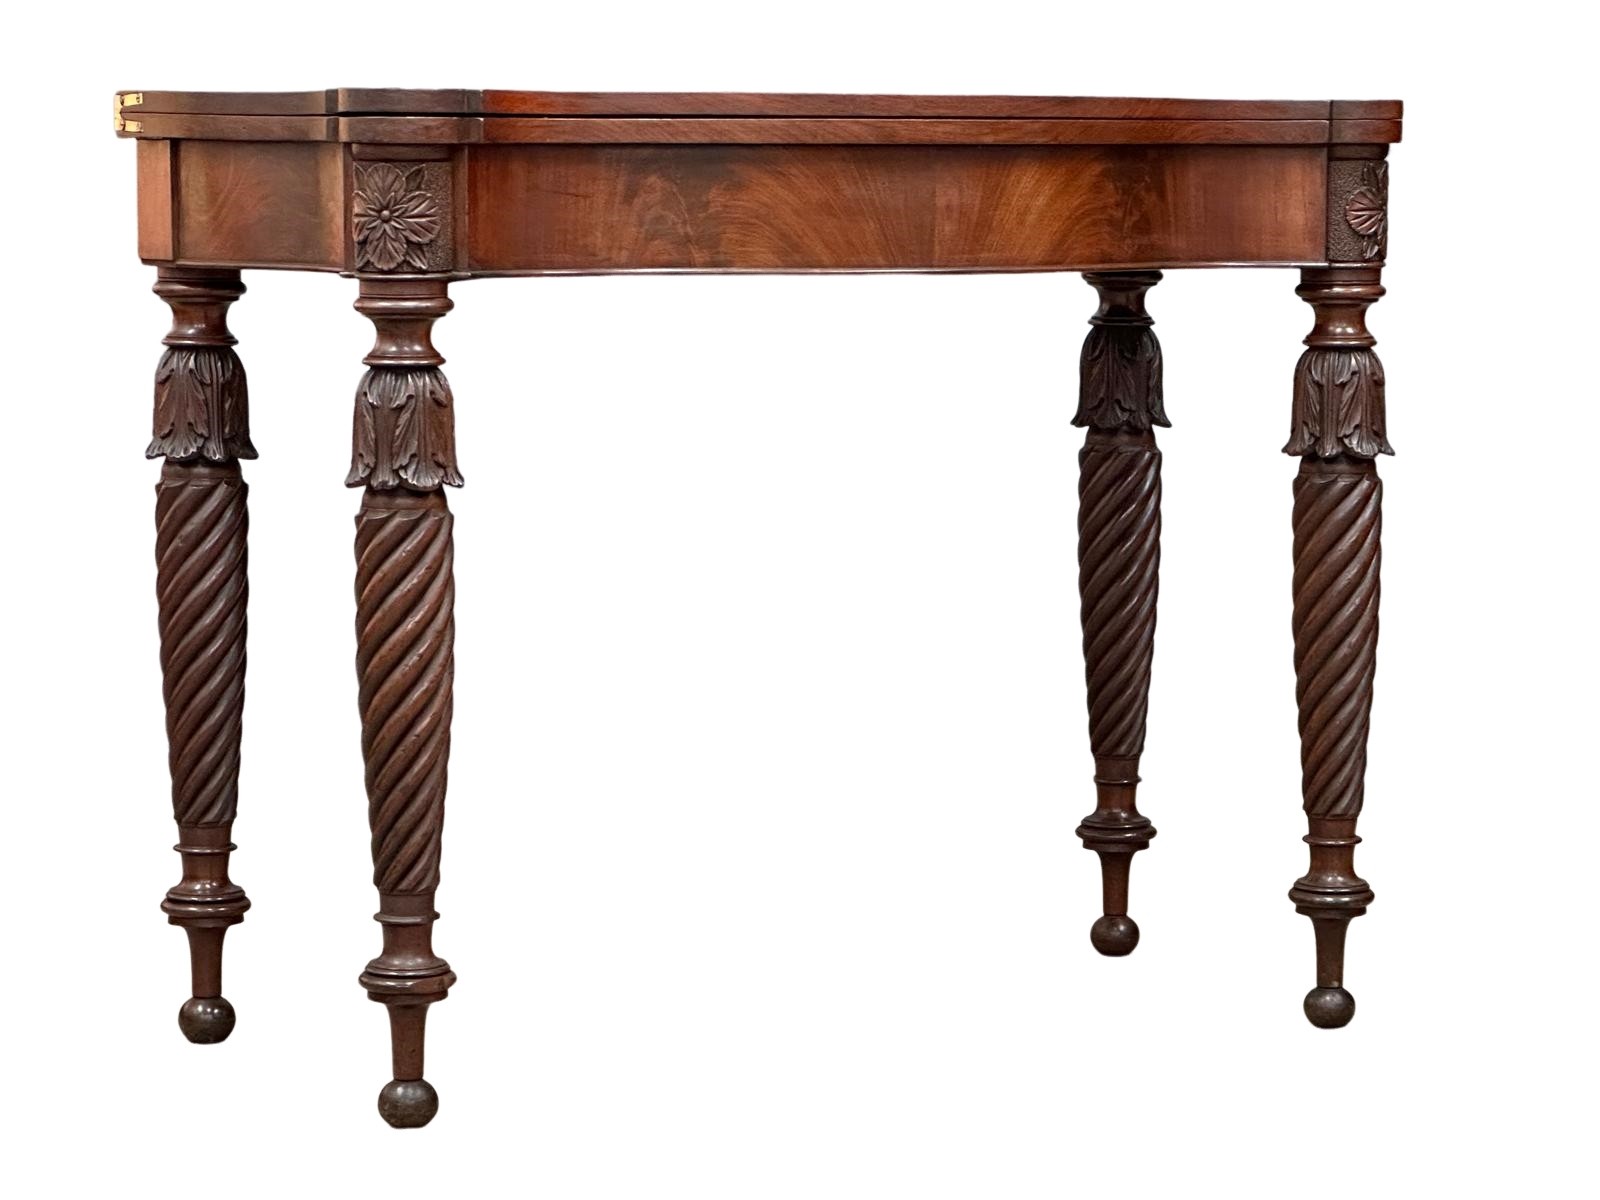 A William IV mahogany serpentine front turnover tea table on turned legs. Circa 1830. 87x44x75cm - Image 7 of 9